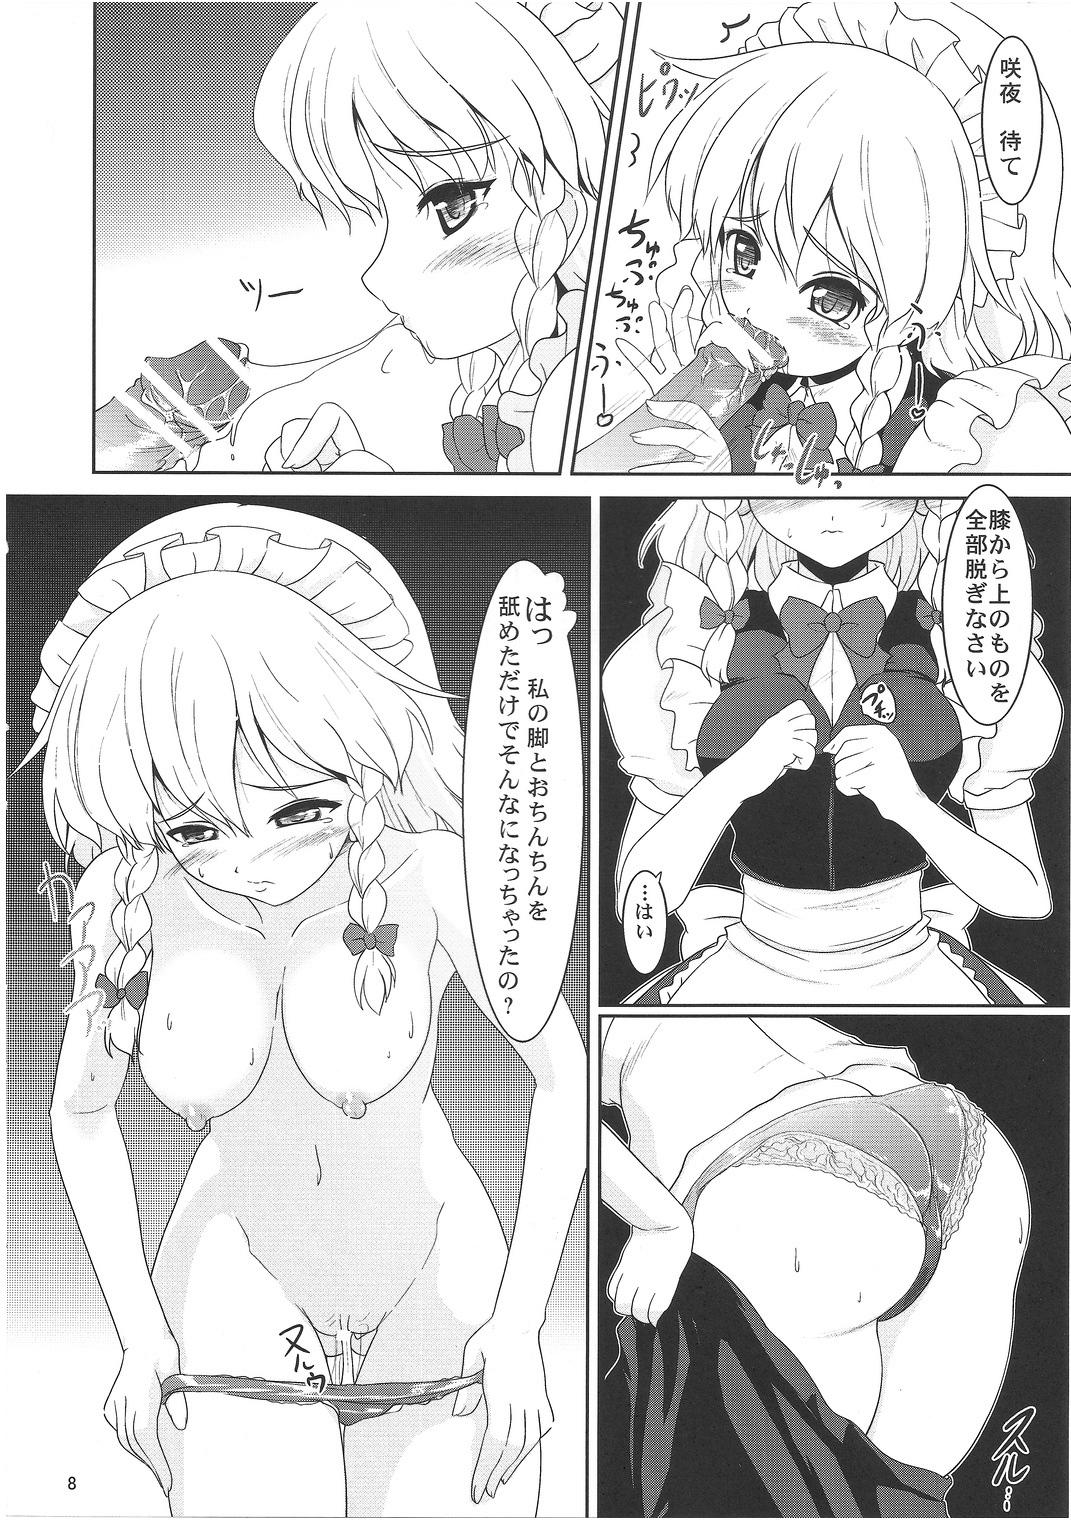 Dicks Maid or Dog - Touhou project Gay Bukkakeboys - Page 7